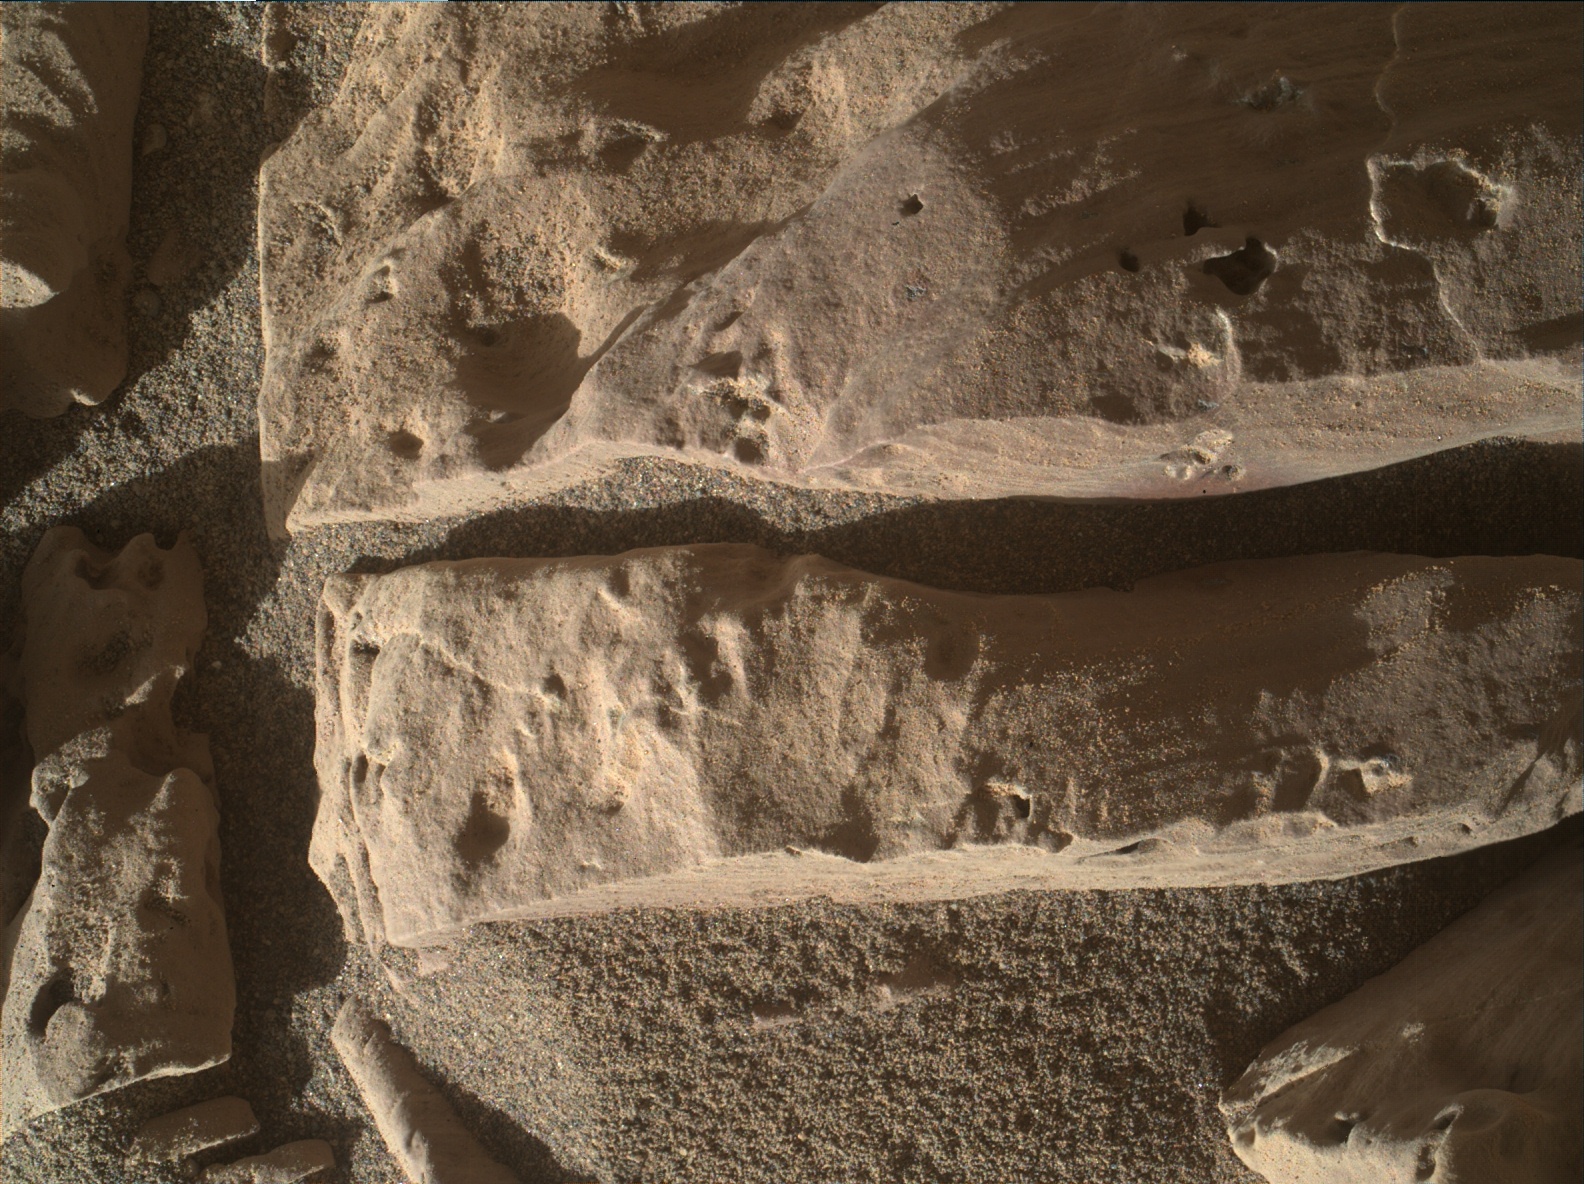 Nasa's Mars rover Curiosity acquired this image using its Mars Hand Lens Imager (MAHLI) on Sol 1946